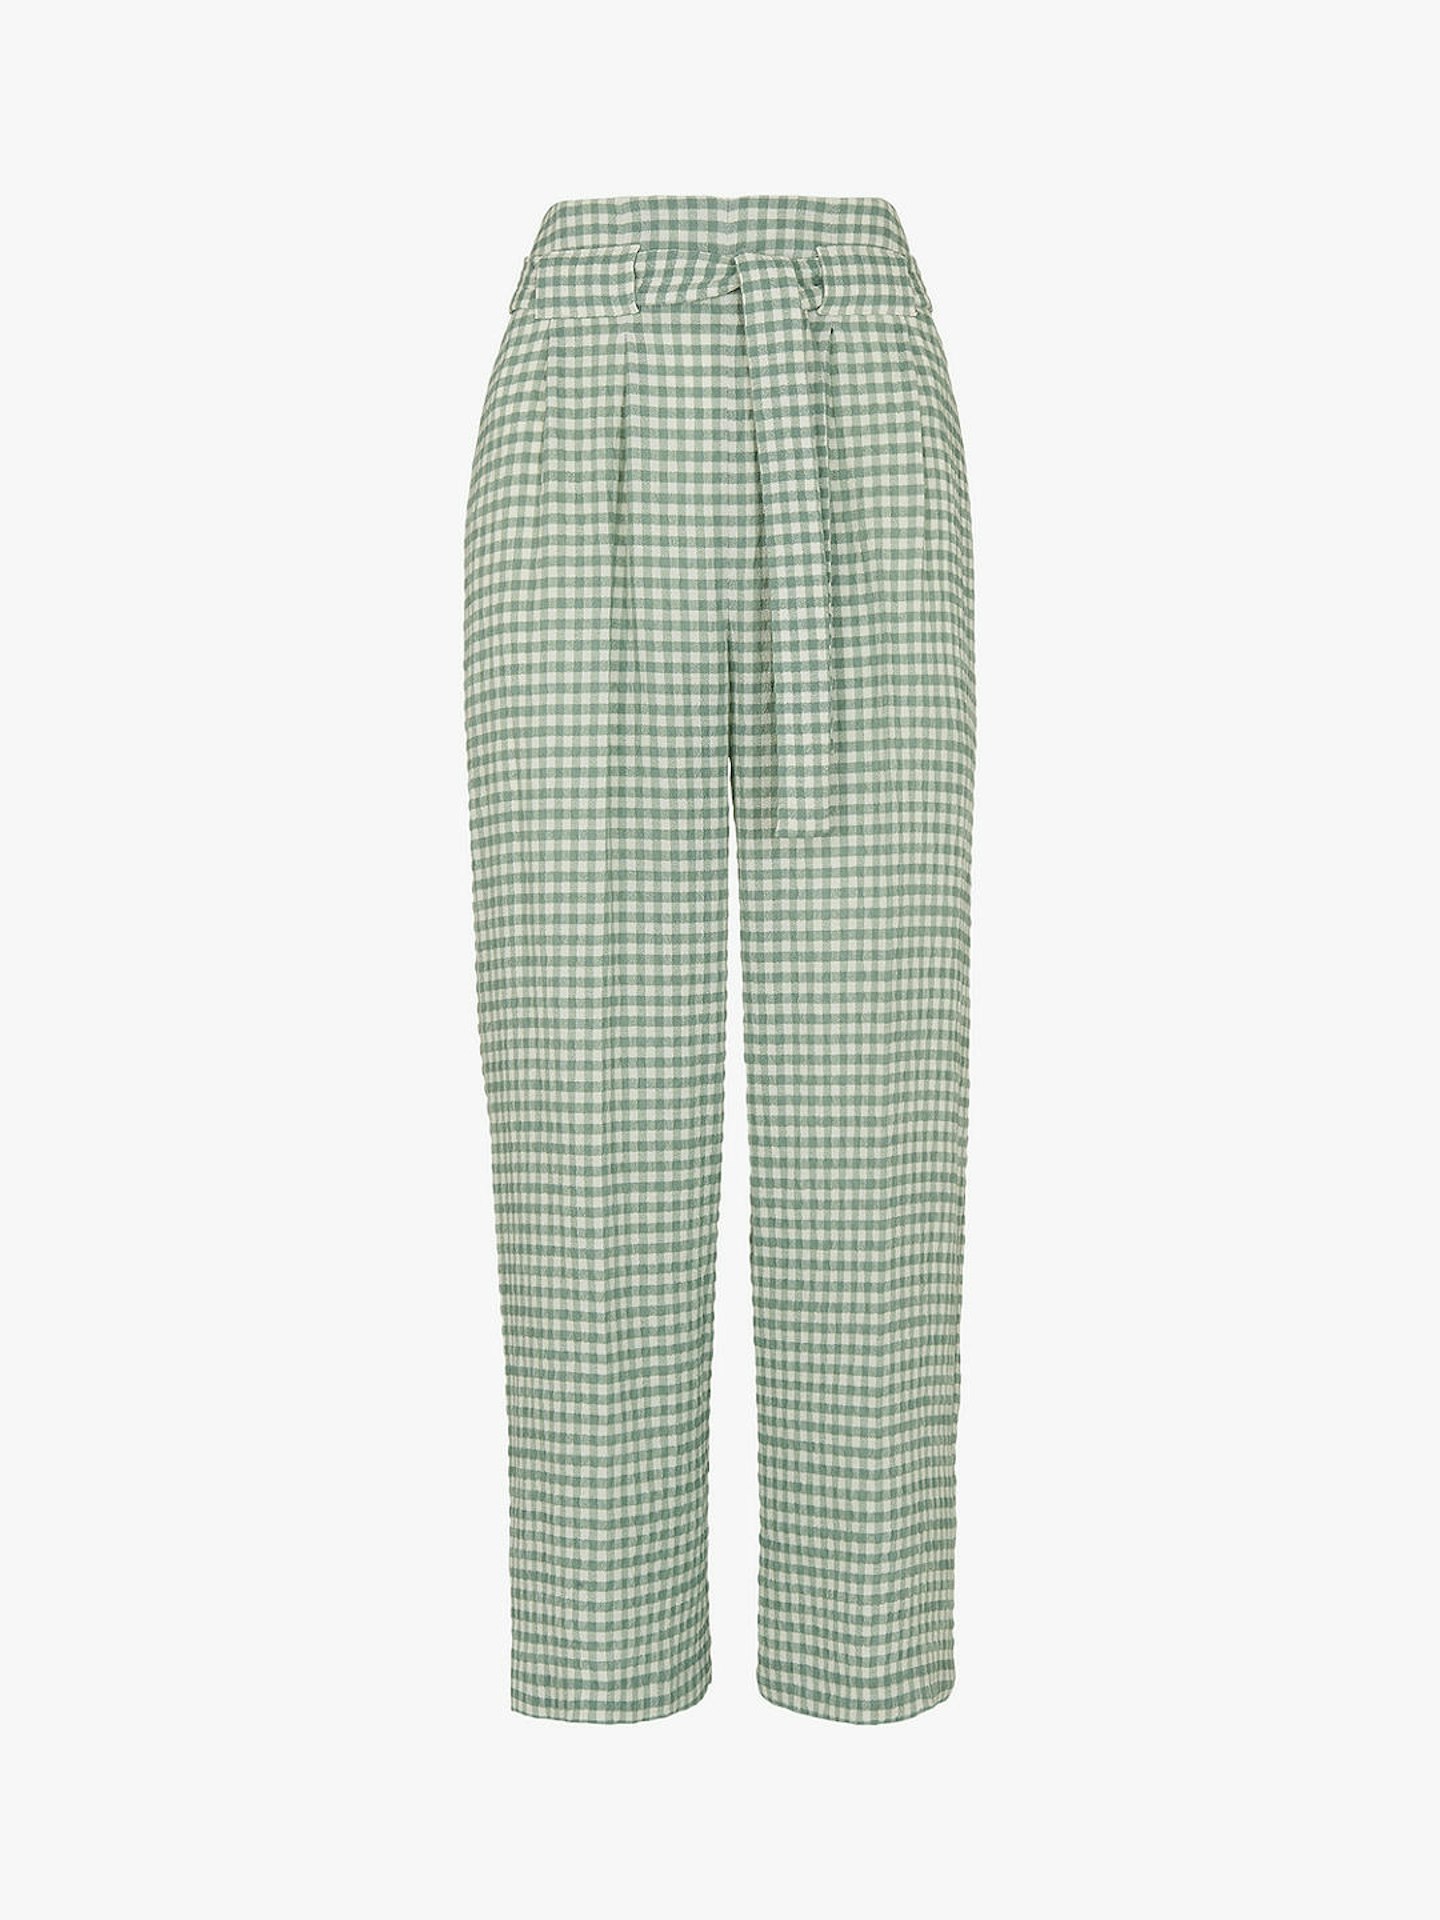 Whitles, Belted Gingham Trousers, £103.20